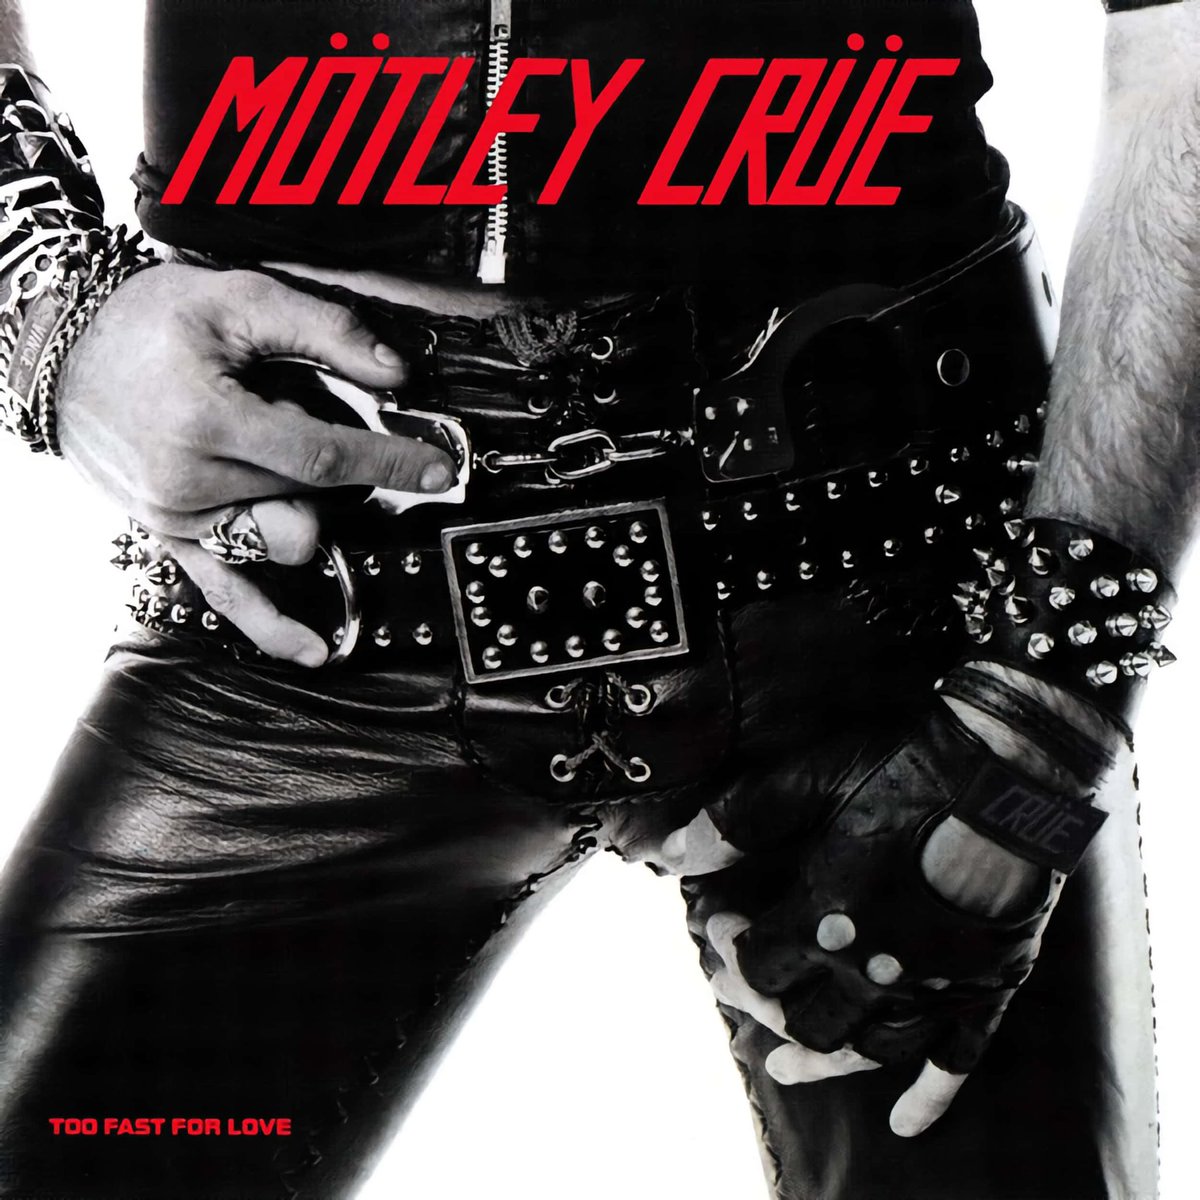 MOTLEY CRUE debut-album 'Too Fast For Love' was released 42 years ago today, on November 10th 1981

READ FULL STORY HERE:
l.linklyhq.com/l/1uaqN

#motleycrue
#nikkisixx
#tommylee
#vinceneil
#mickmars
#todayinmetal
#metaldepartment